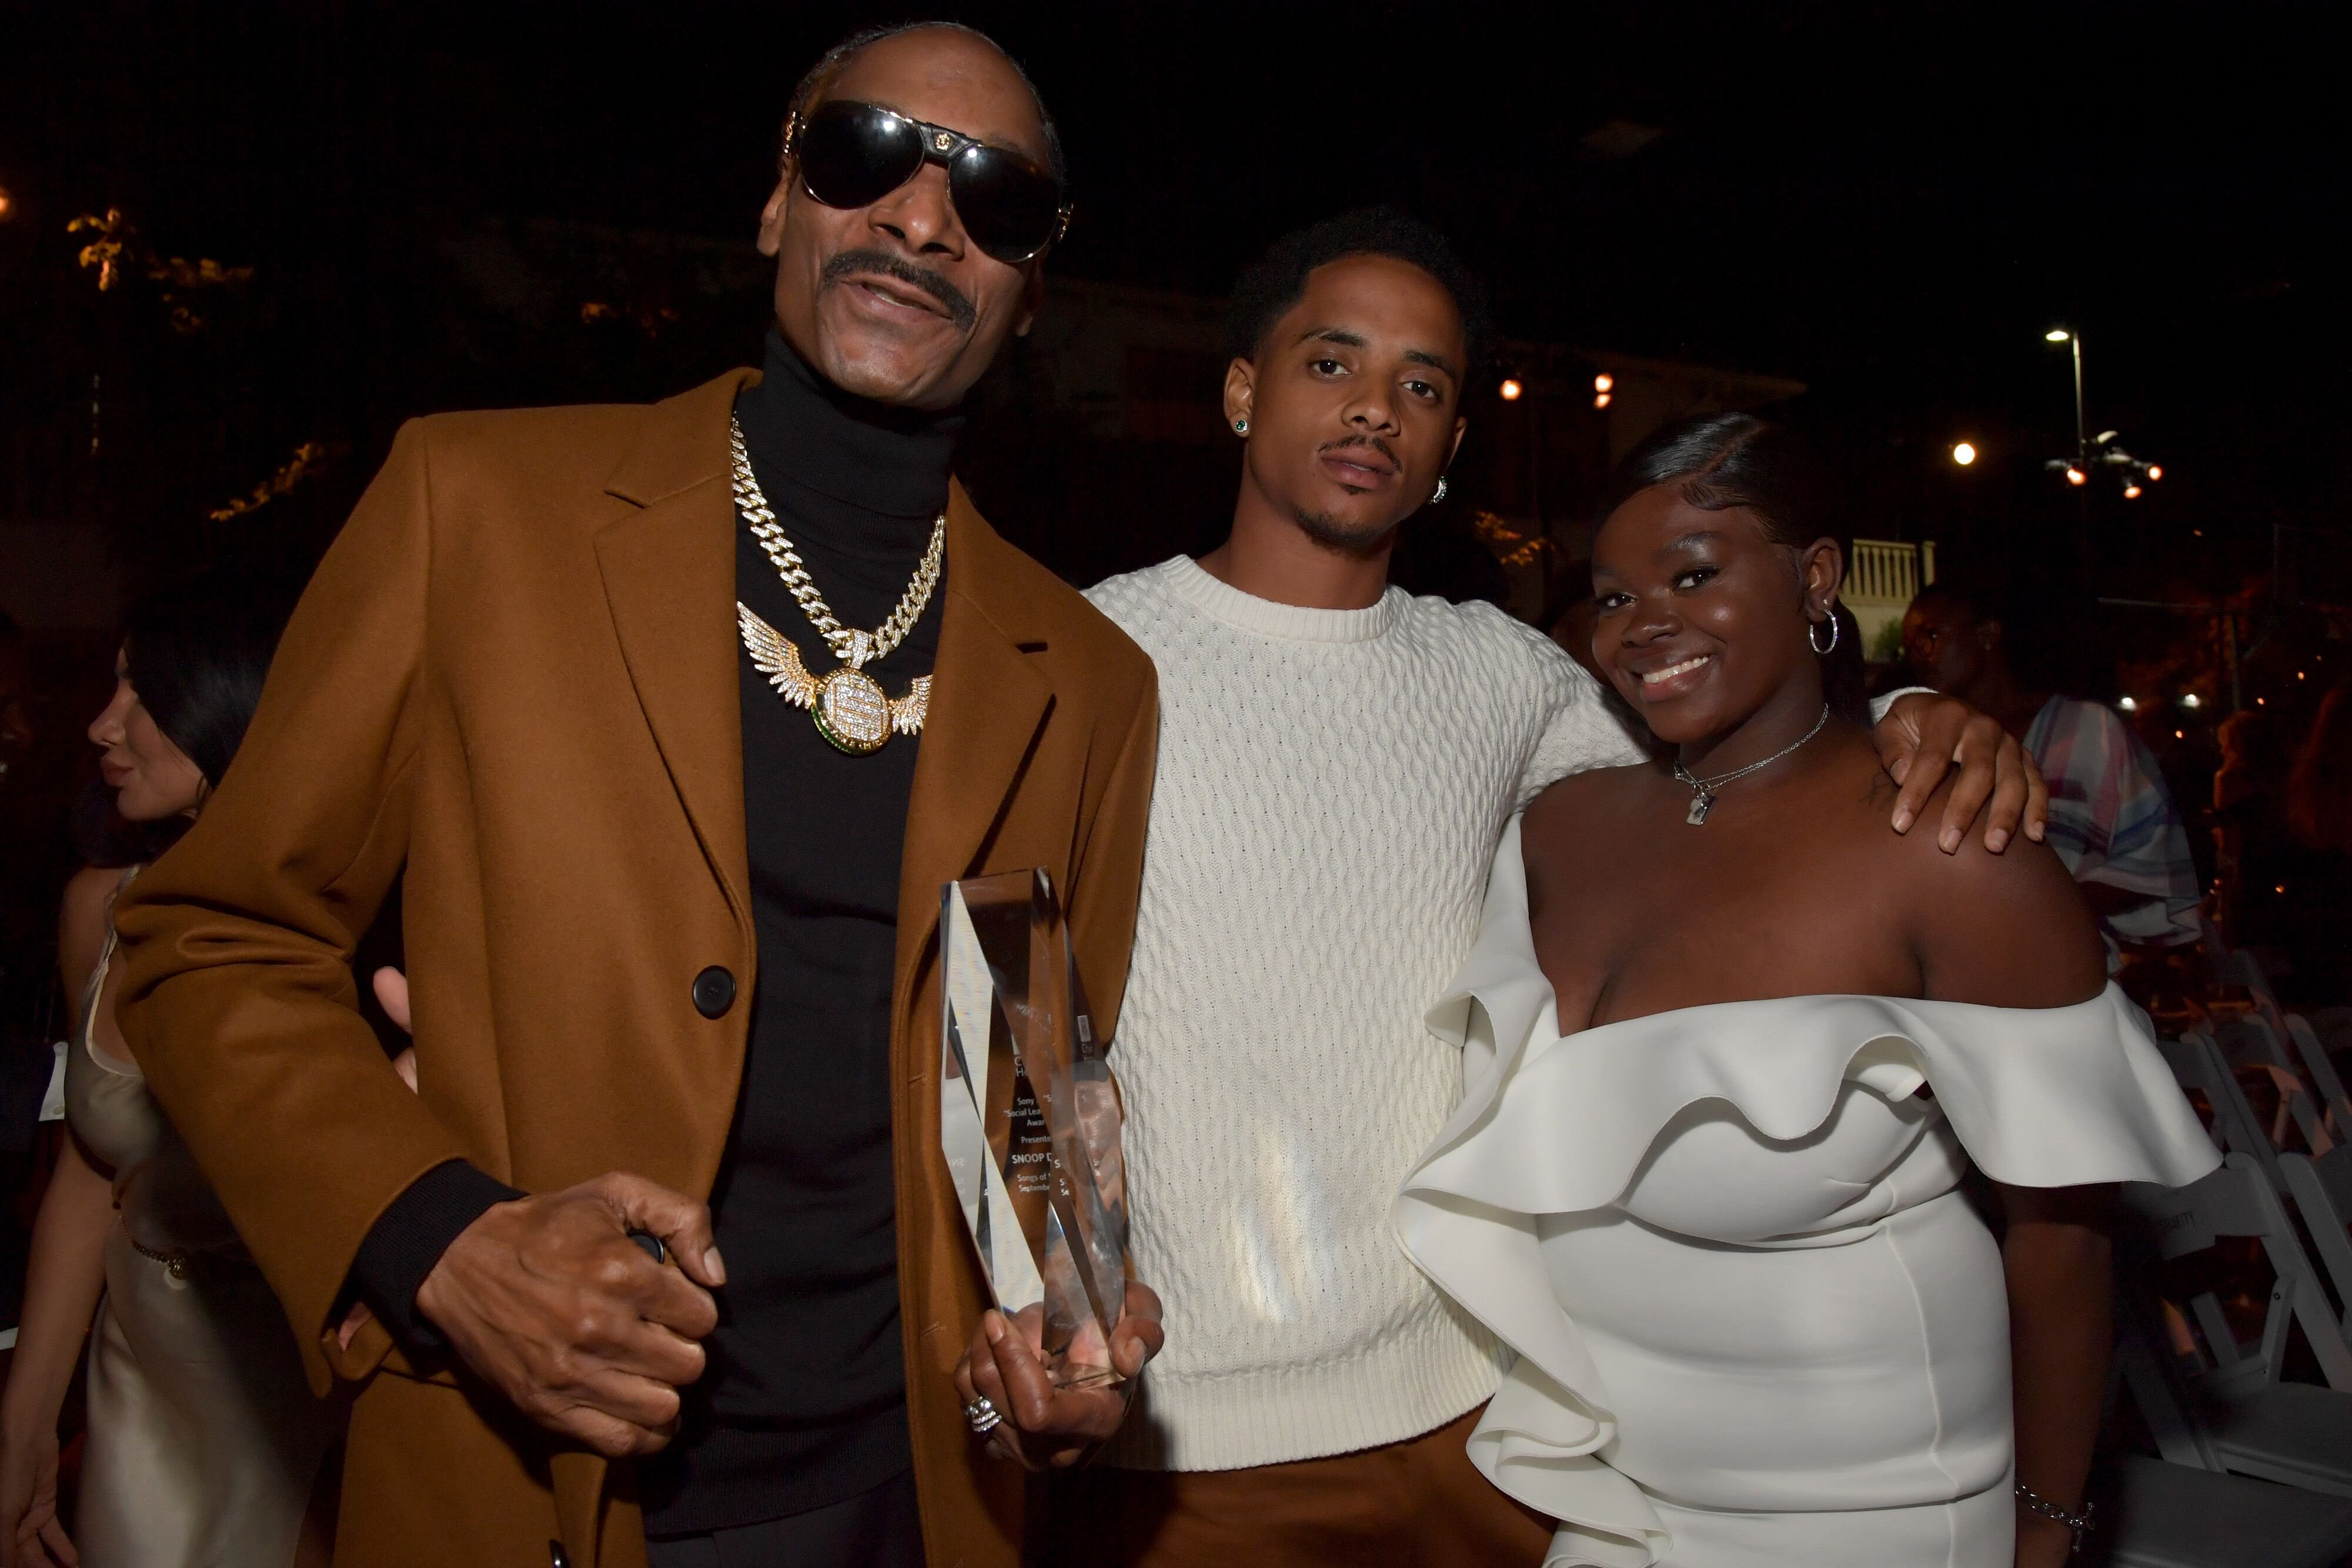 Snoop Dogg, Cordell Broadus and Cori Broadus attend City of Hope: 15th Annual Songs of Hope on September 19, 2019 in Sherman Oaks, California. | Source: Getty Images